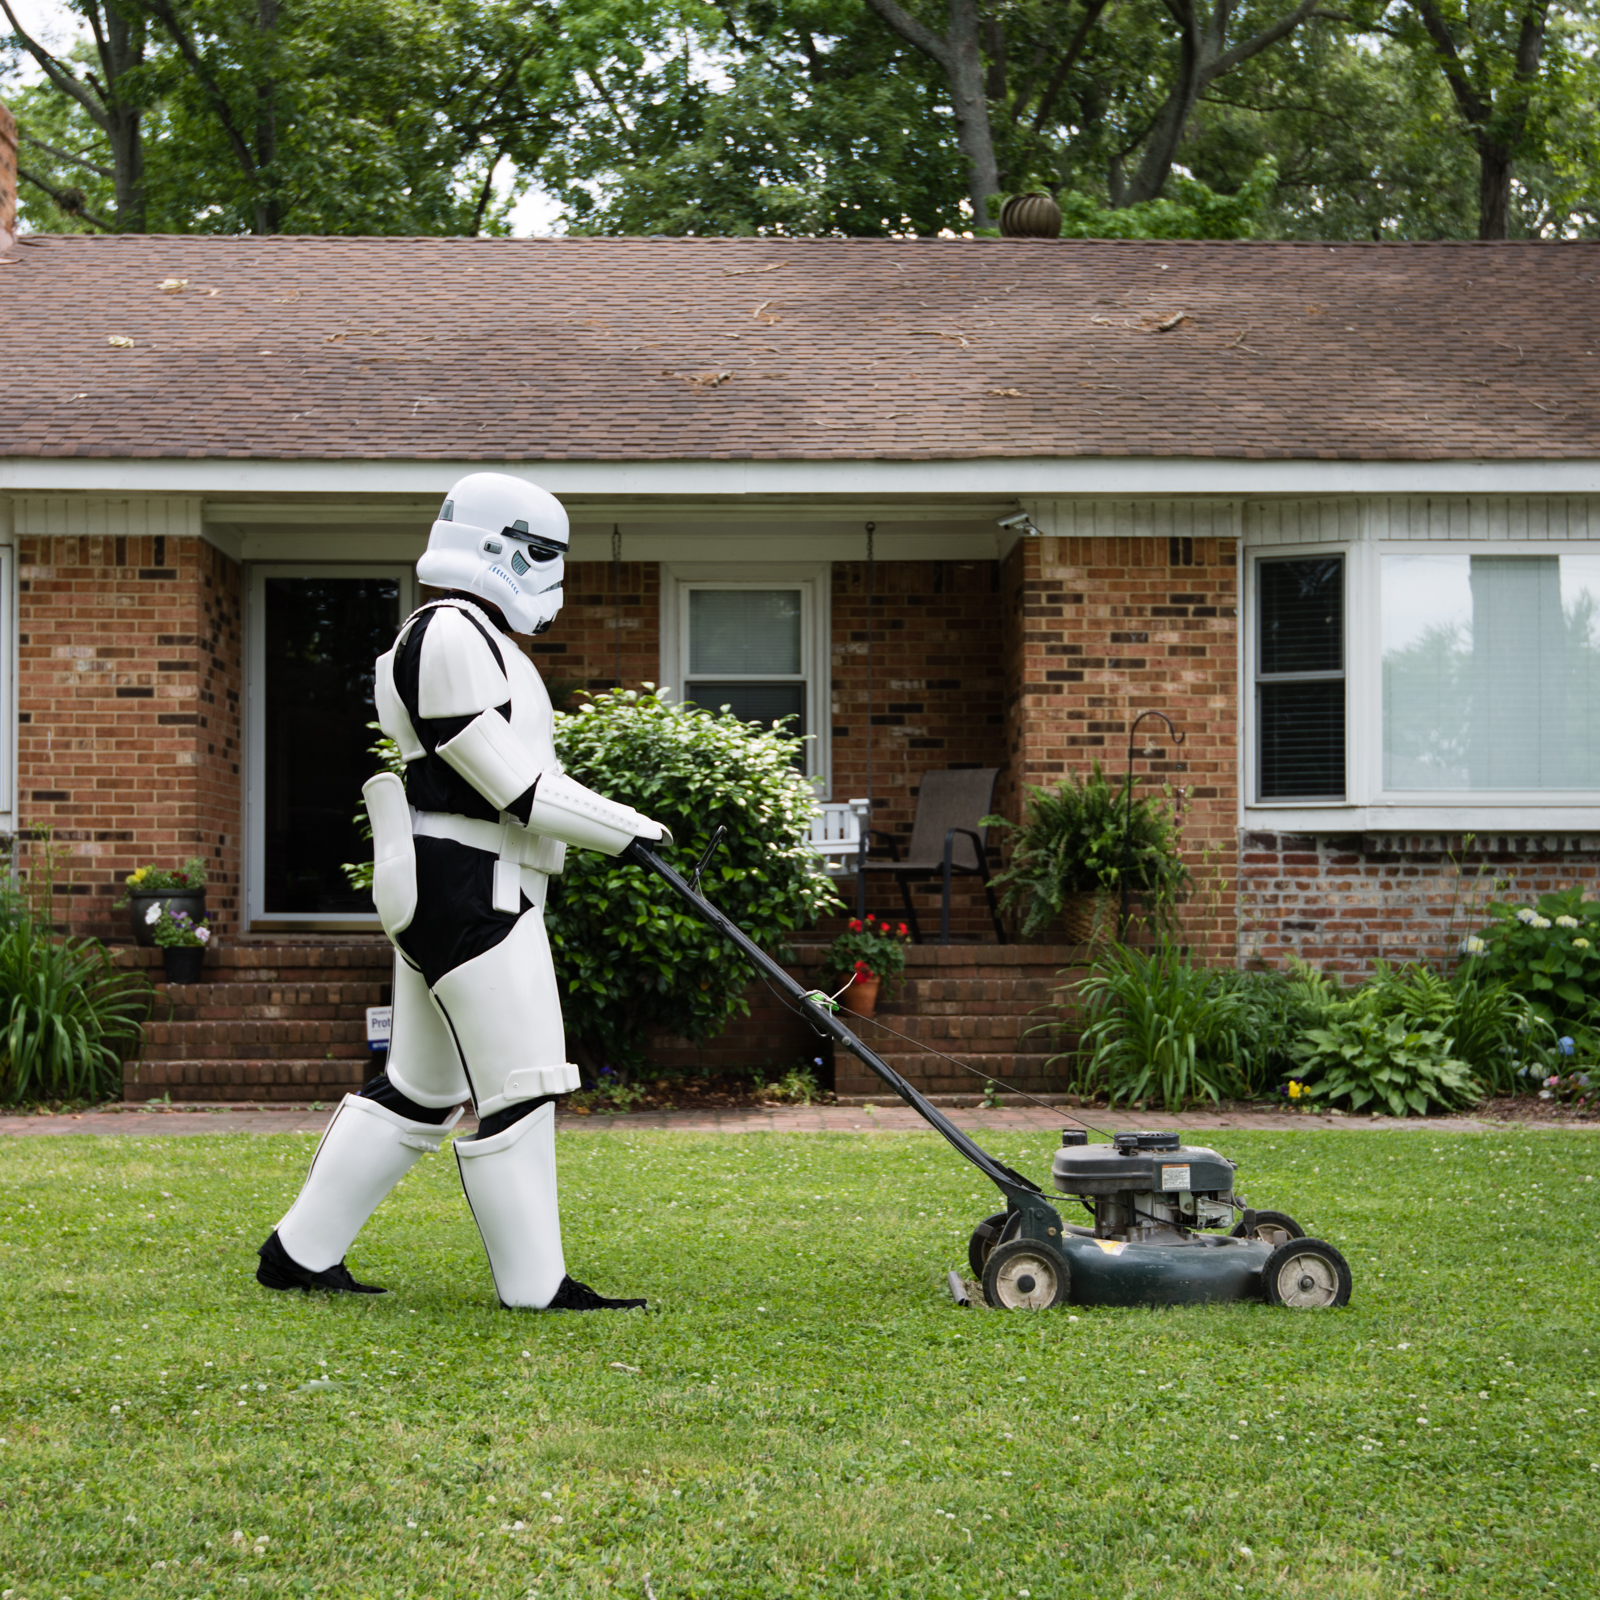 Featured image for “A Day In The Life Of A Modern Day Stormtrooper”